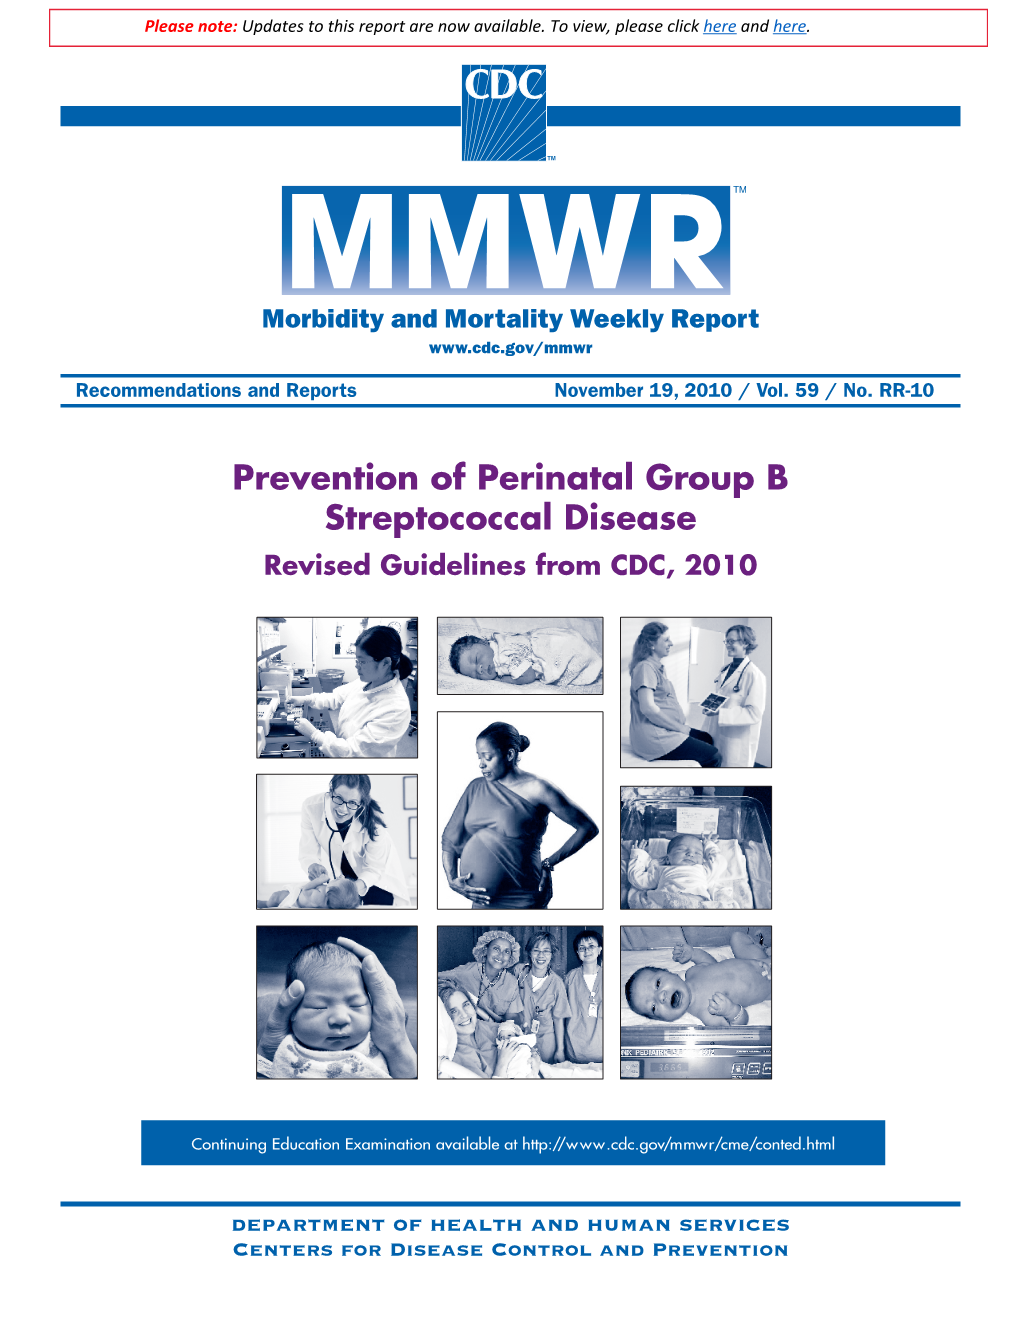 Prevention of Perinatal Group B Streptococcal Disease Revised Guidelines from CDC, 2010